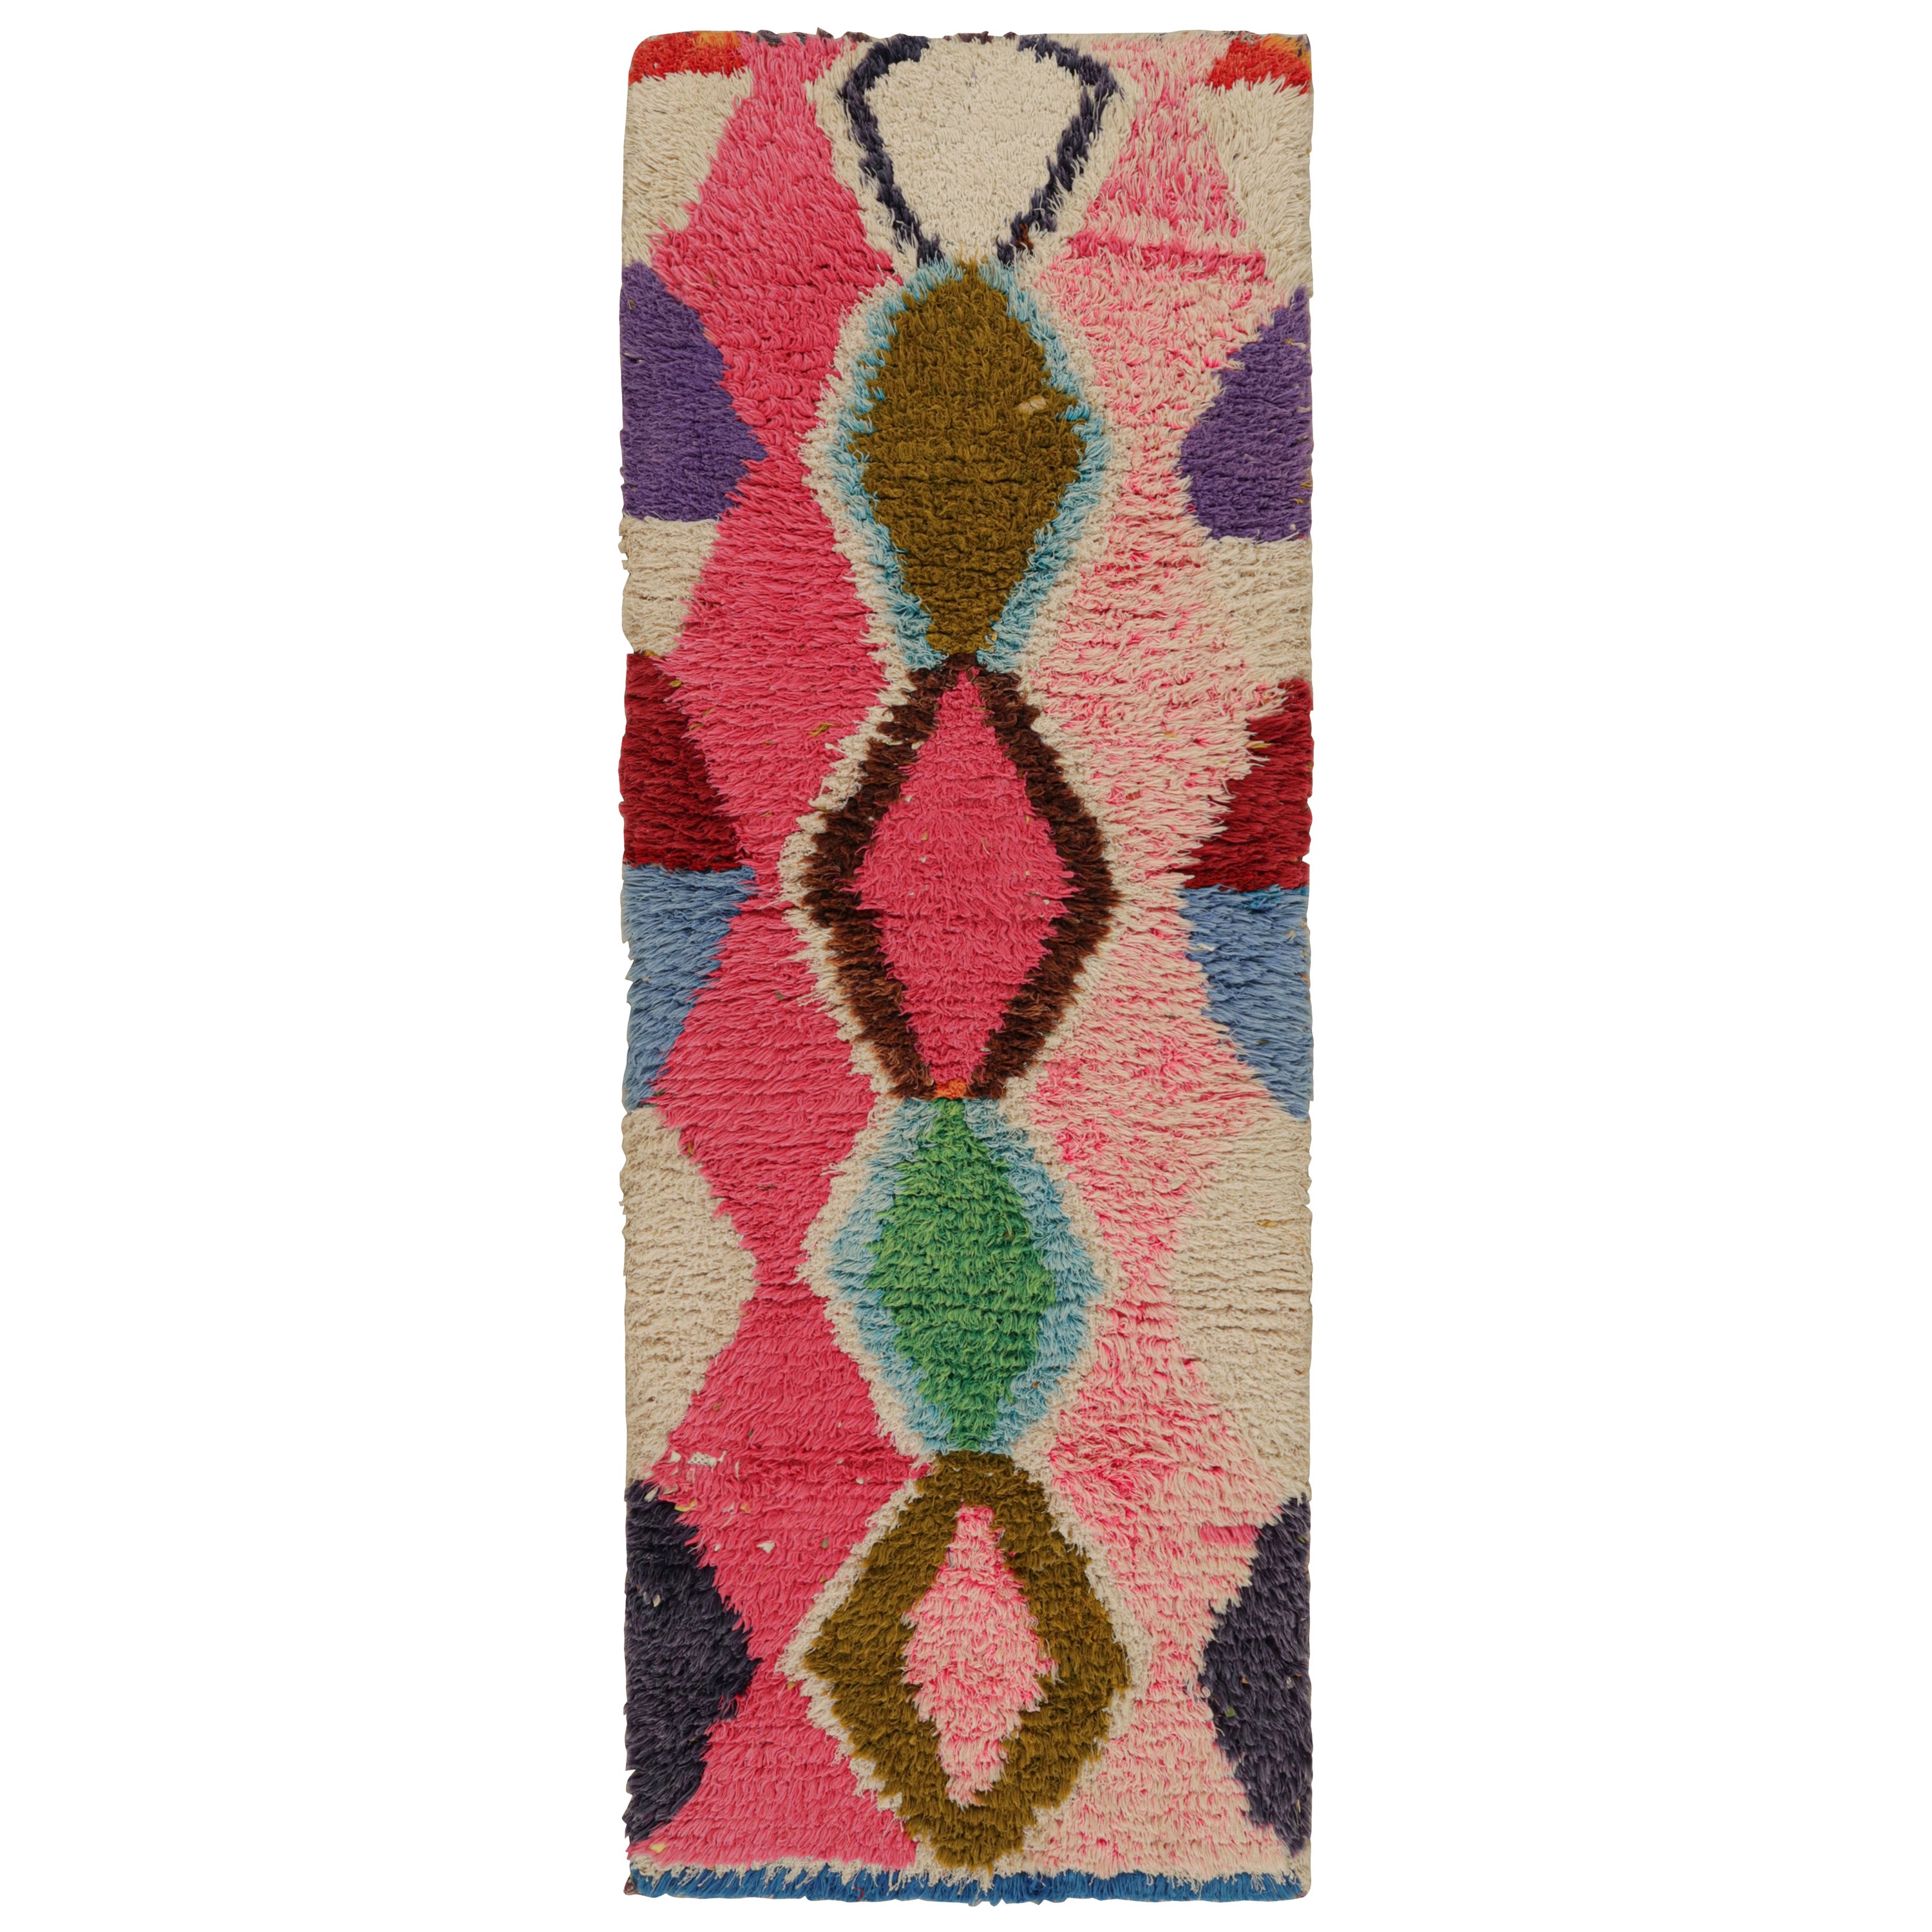 Vintage Azilal Moroccan Style Runner Rug, with Patterns from Rug & Kilim